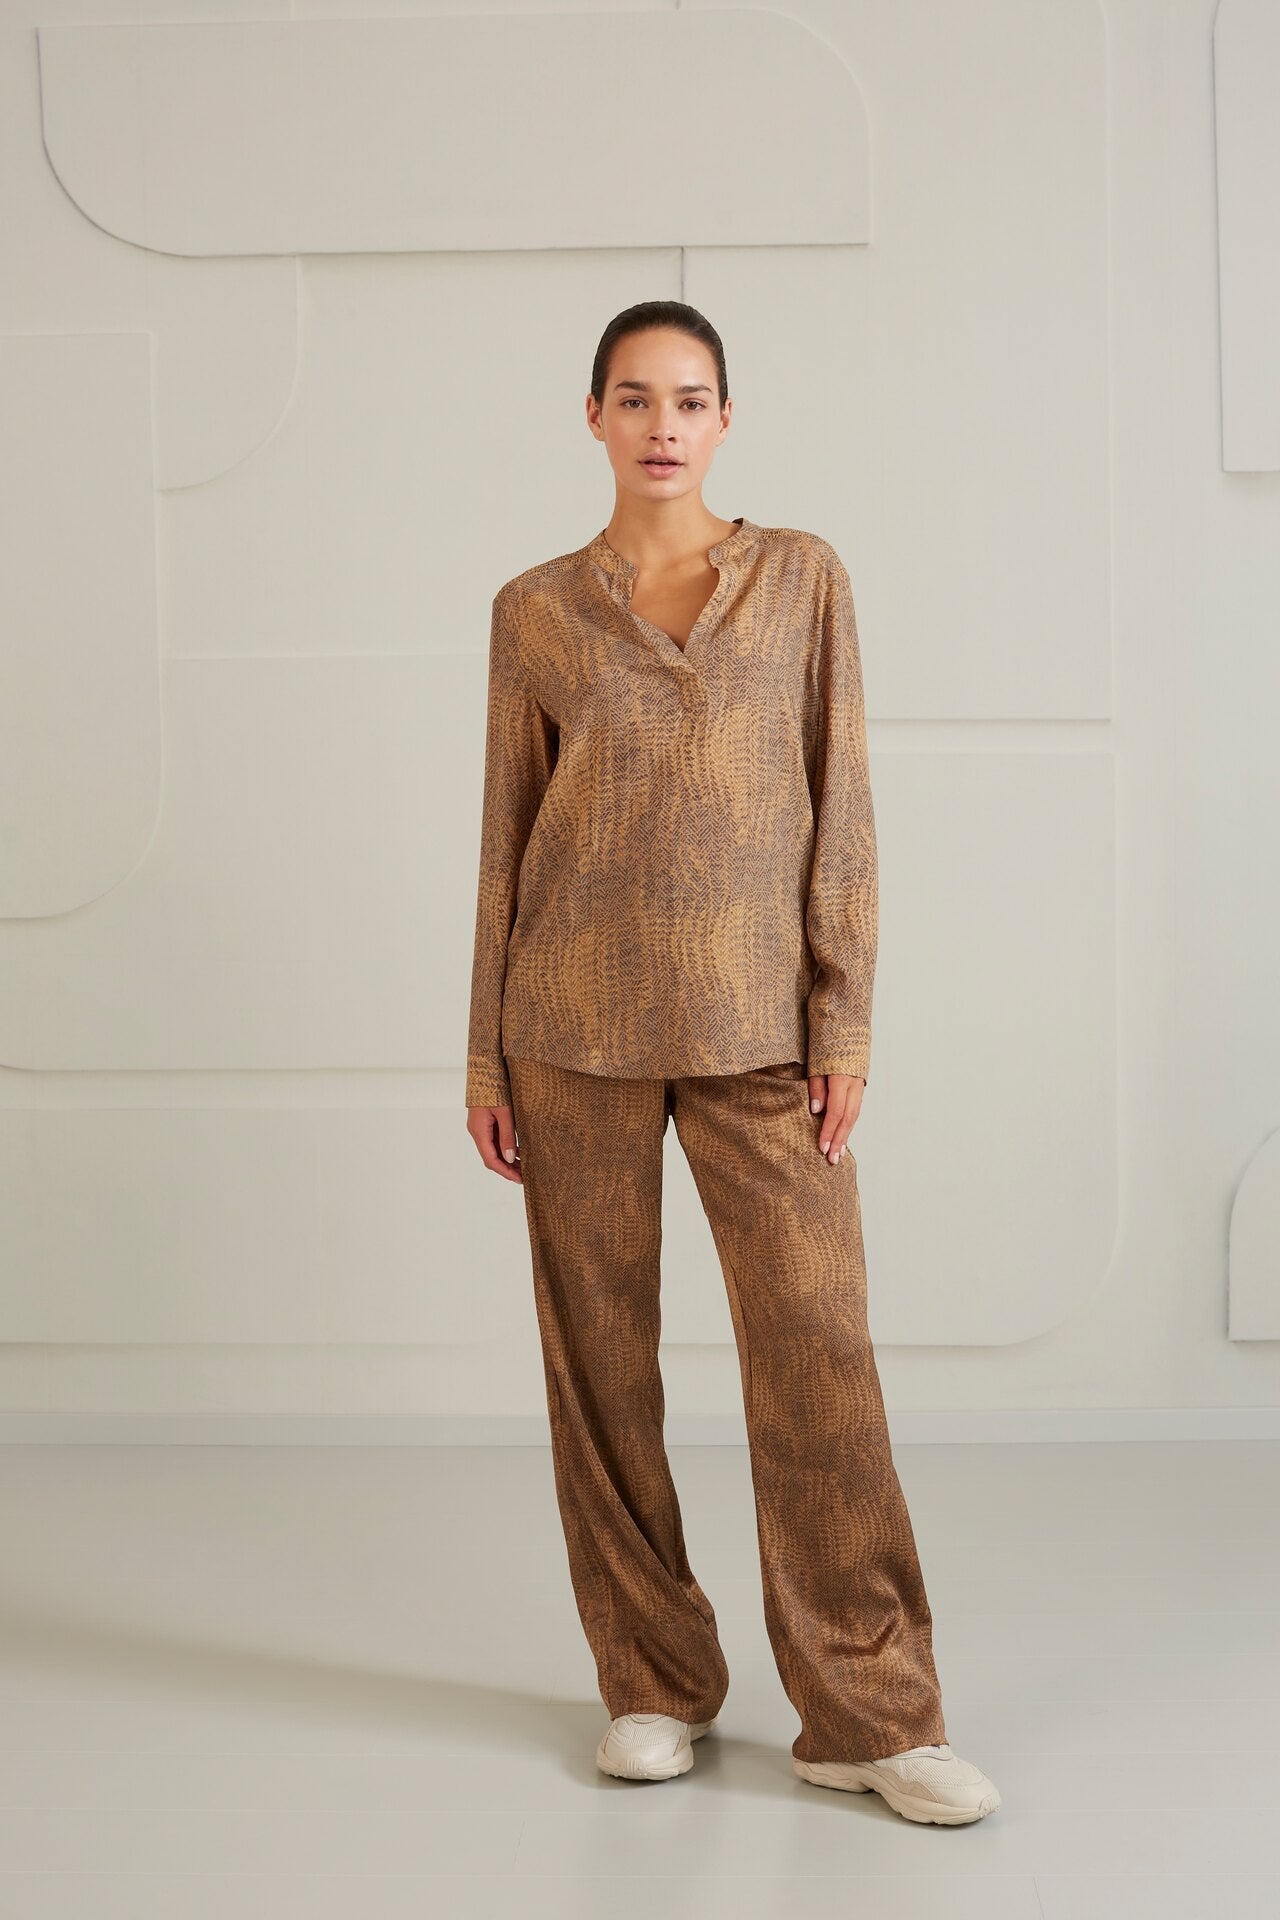 Wide leg trousers with pockets, zip fly and snake print